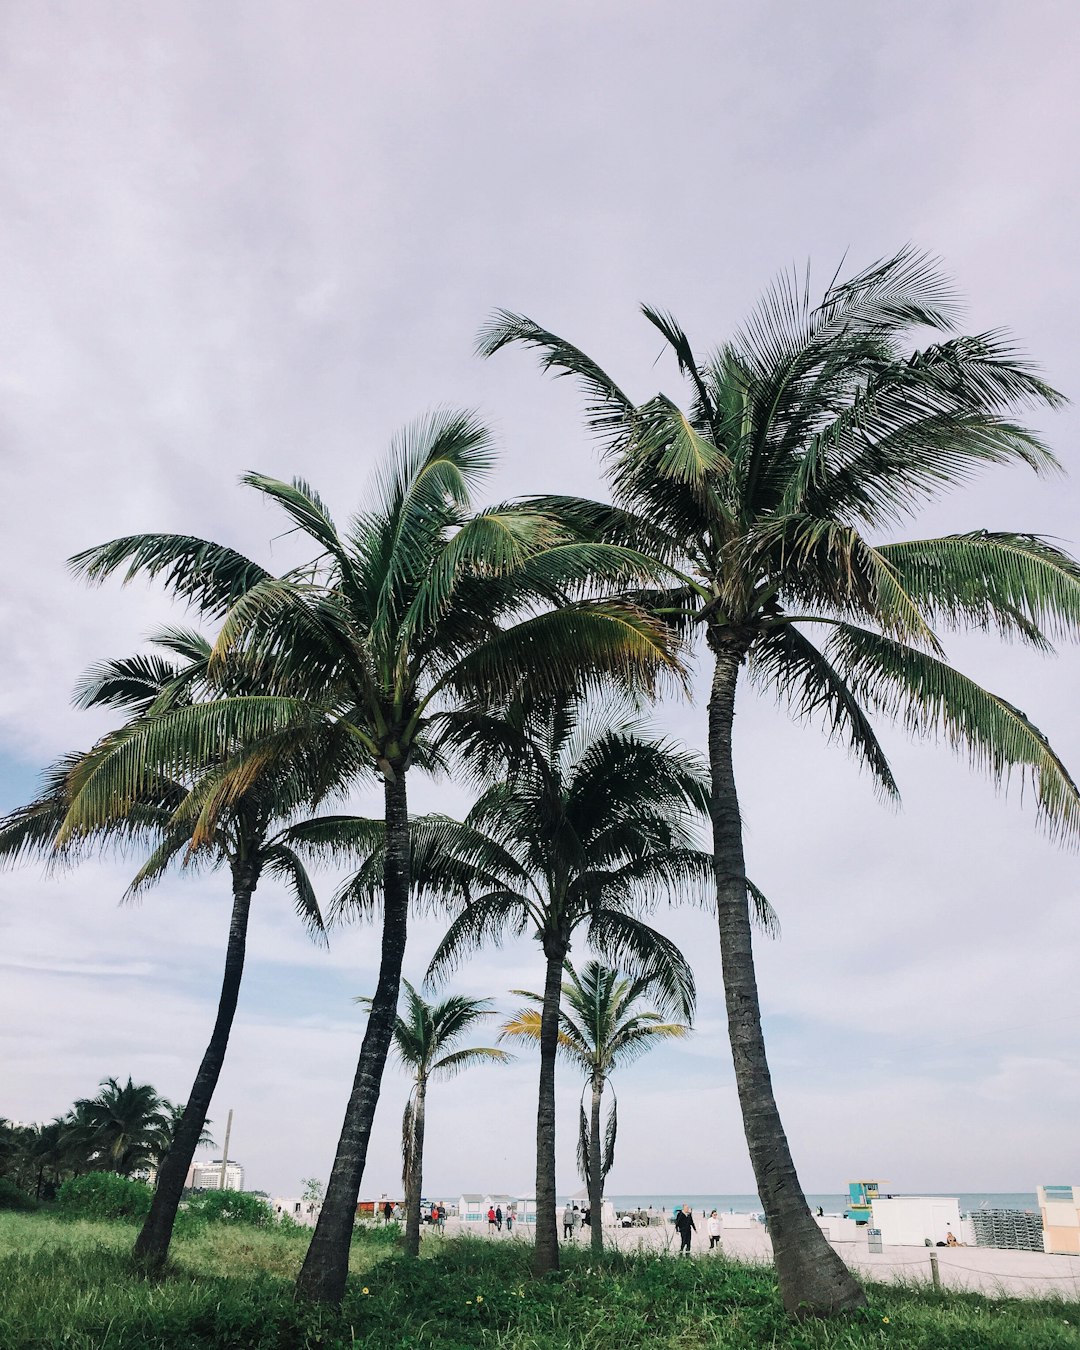 Travel Tips and Stories of South Beach in United States